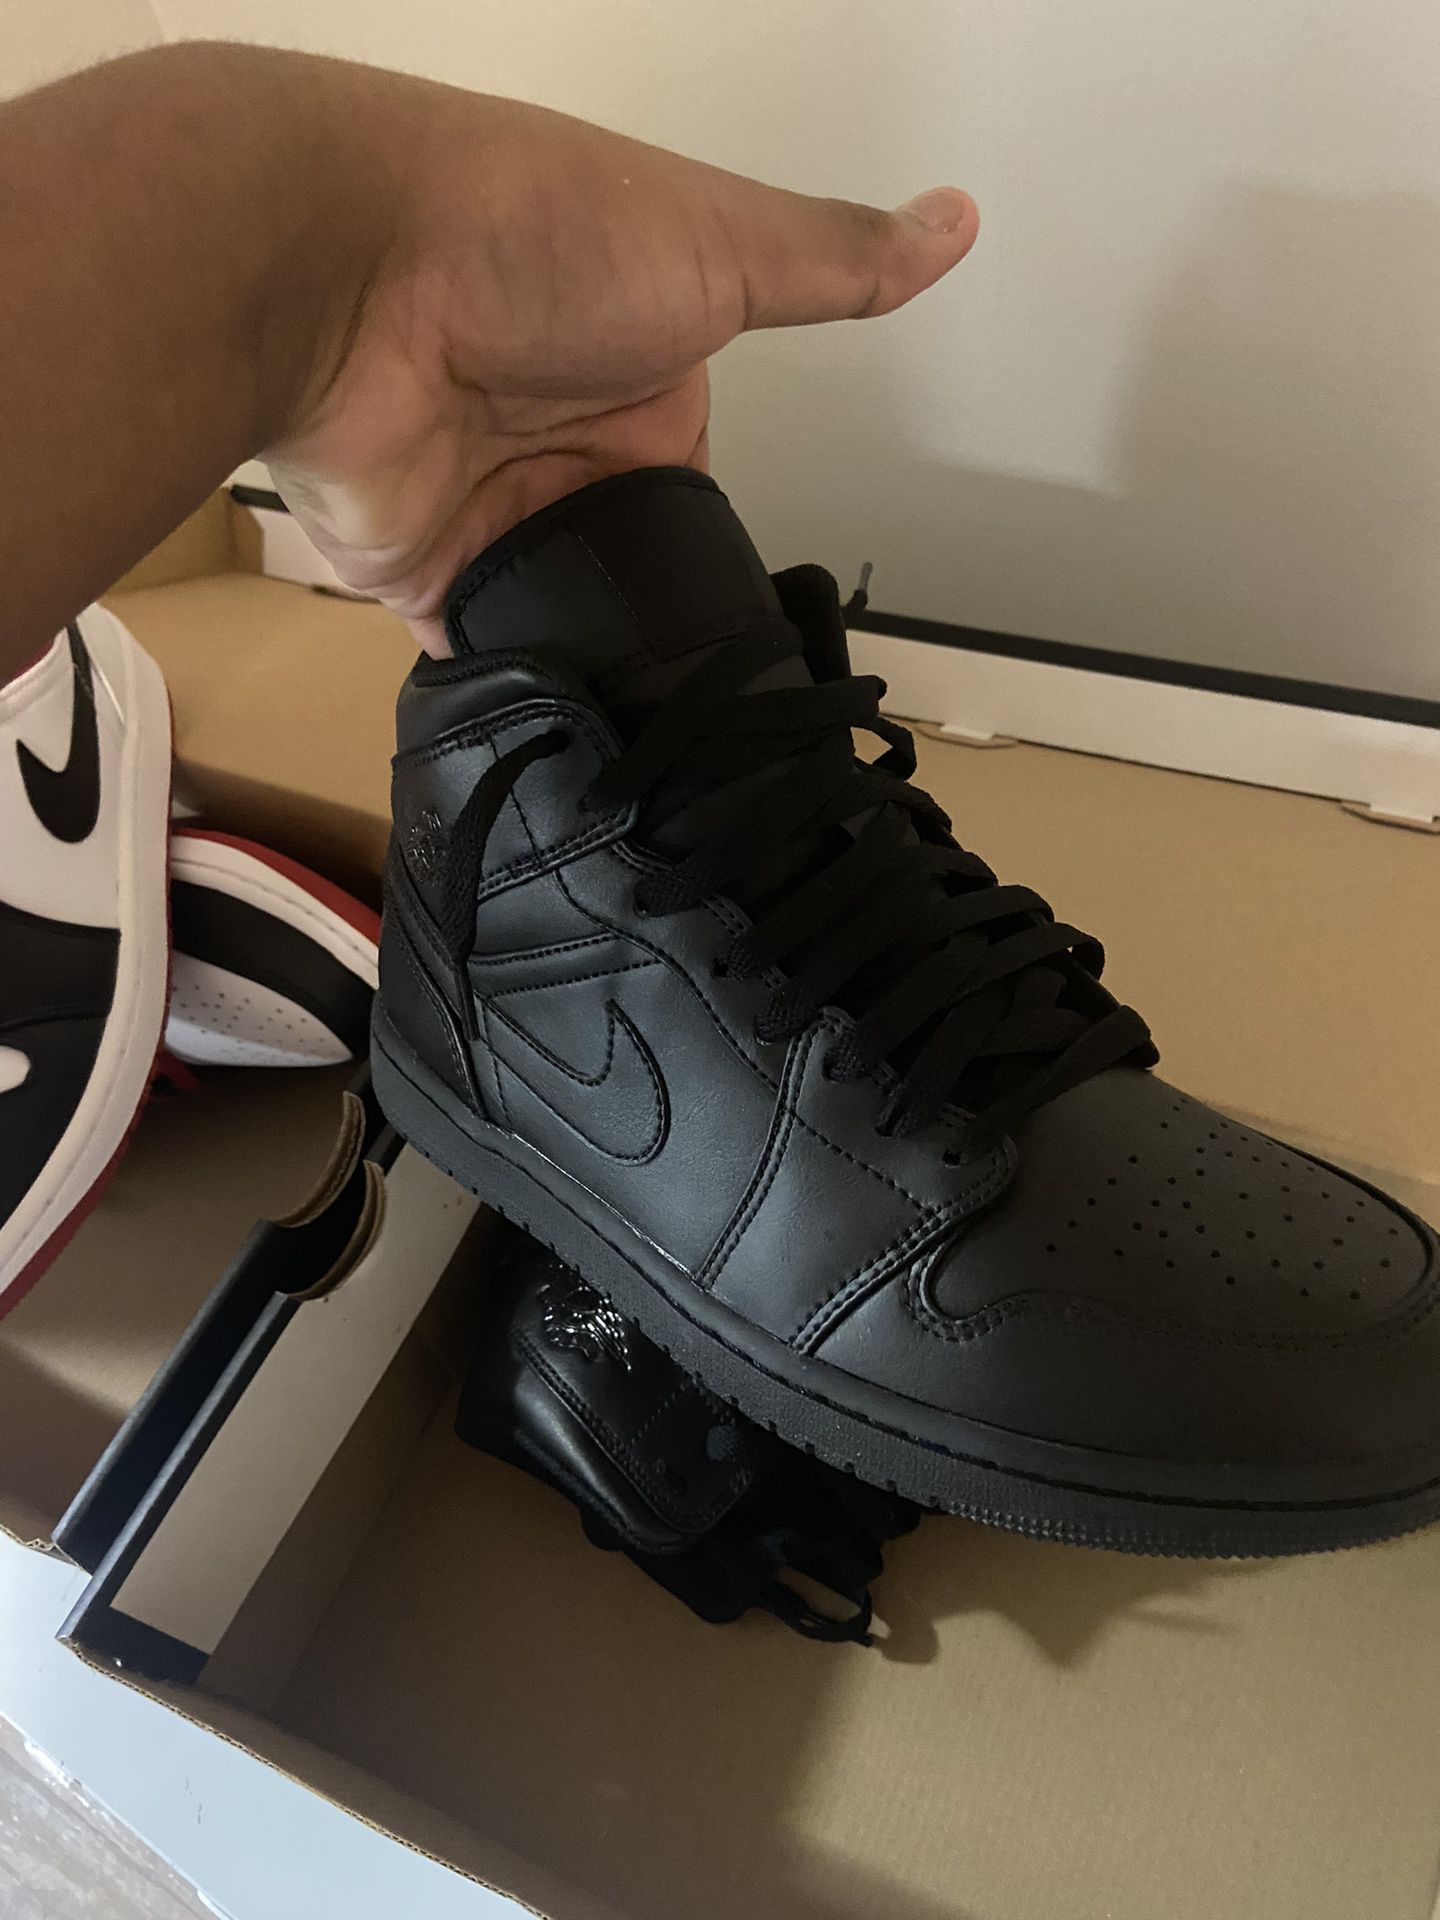 All Black Jordan 1 Mid, Size 8, Originally Bought For $120, But Im Selling For Only 75, Will To Negotiate The Price